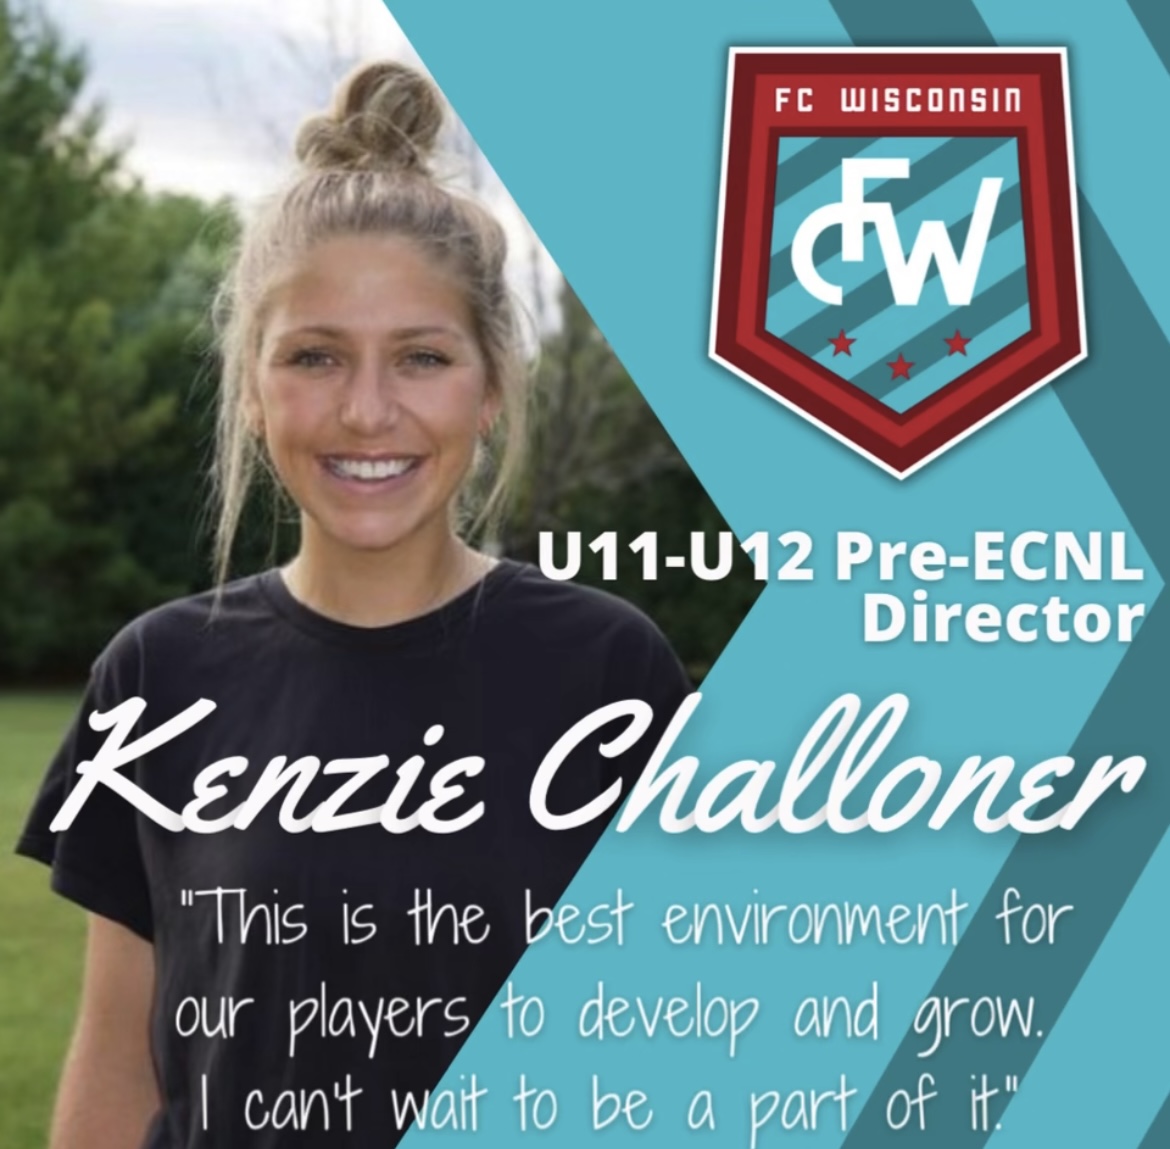 Kenzie Challoner To Be Pre-ECNL Director